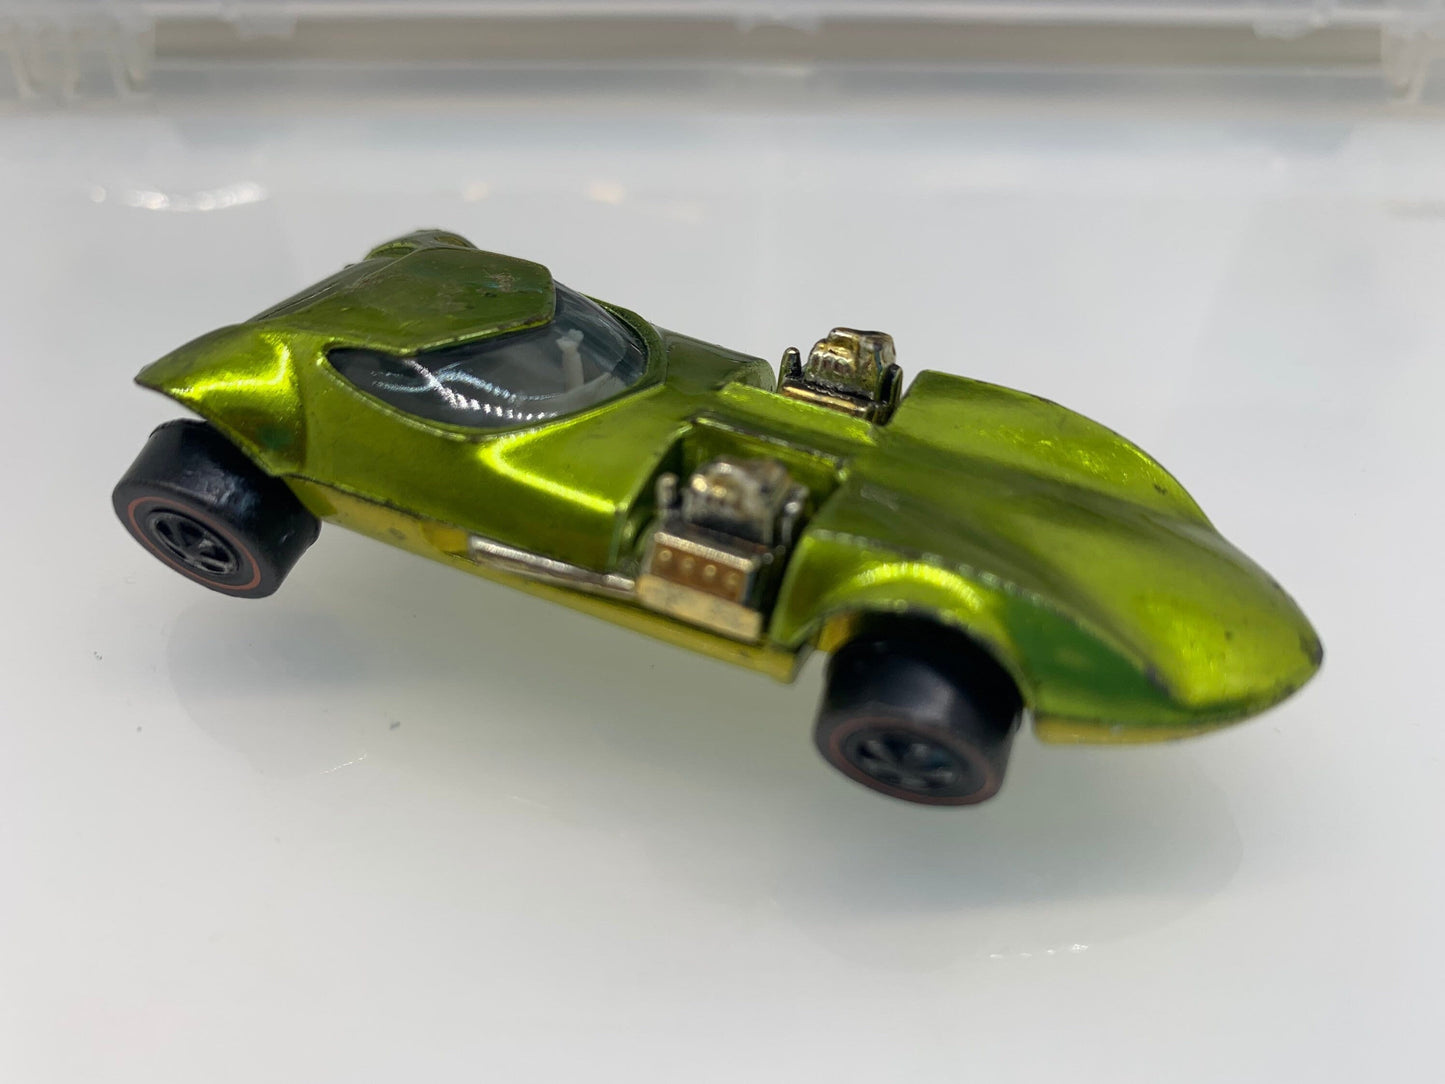 Hot Wheels Twin Mill Antifreeze Green Redline Perfect Birthday Gift Miniature Collectable Scale Model Toy Car